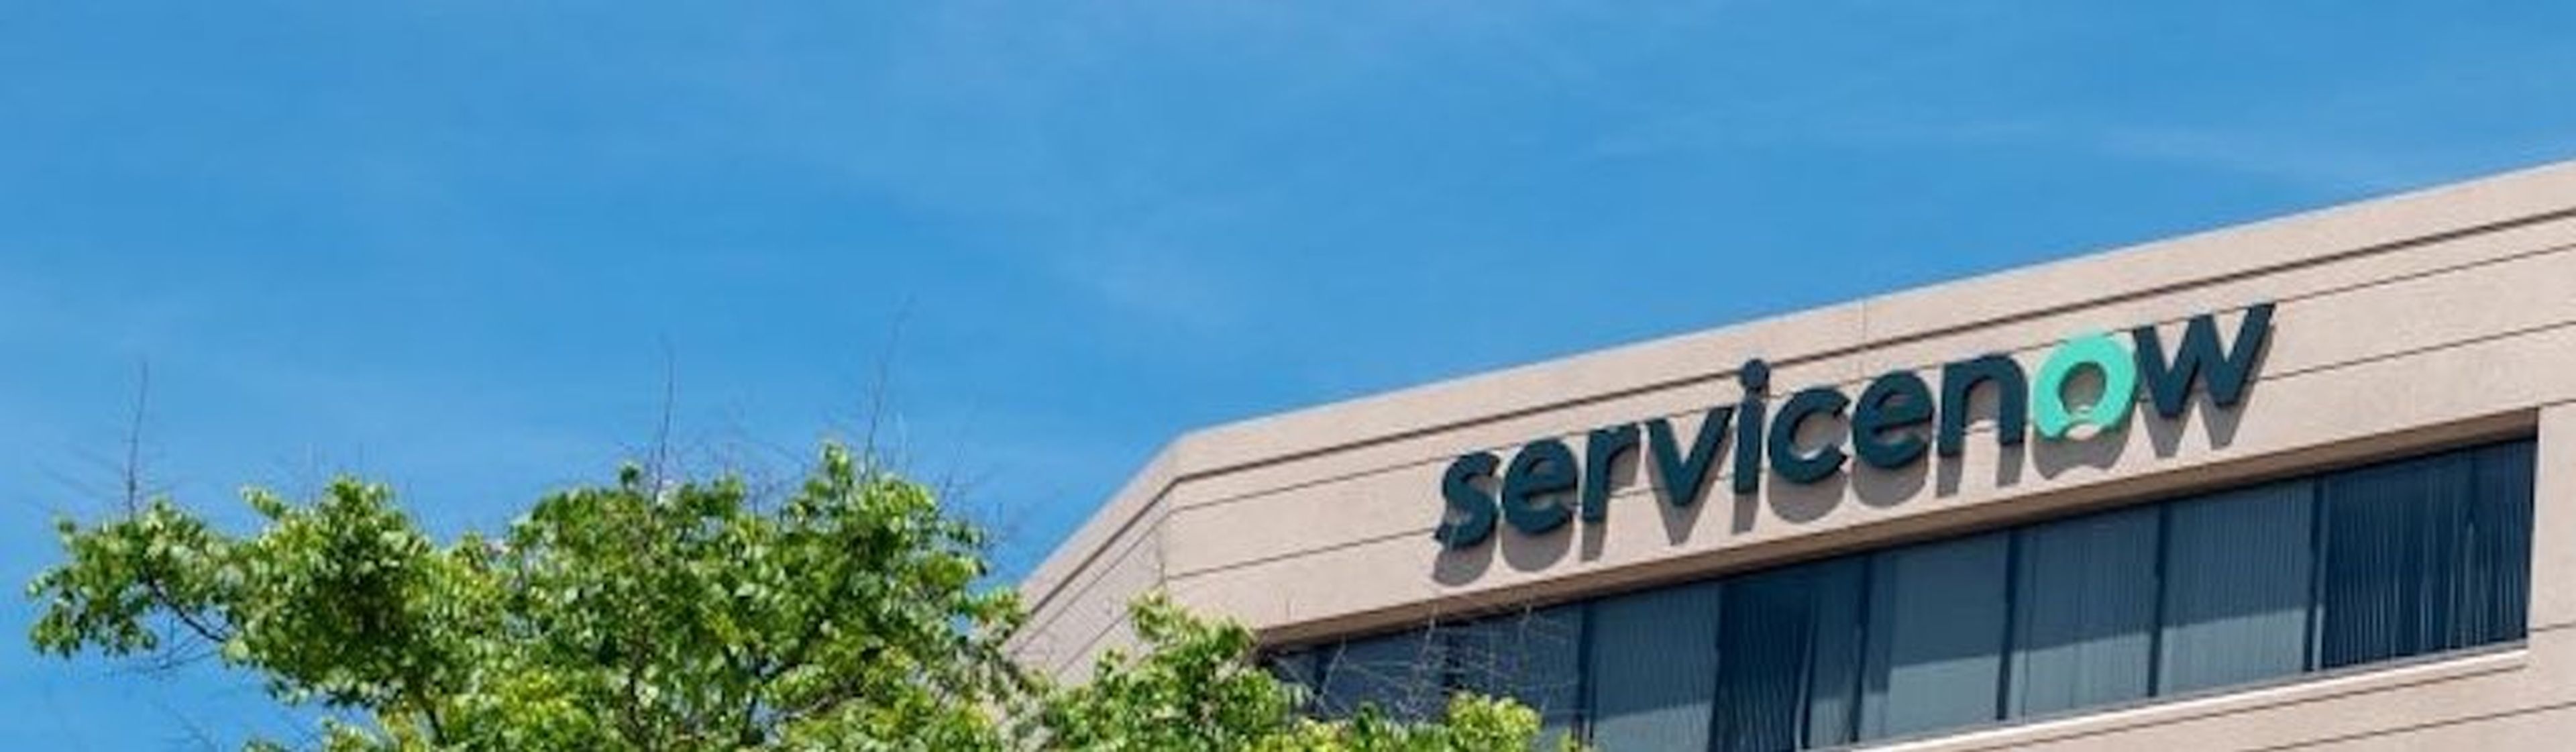 ServiceNow offices with new logo